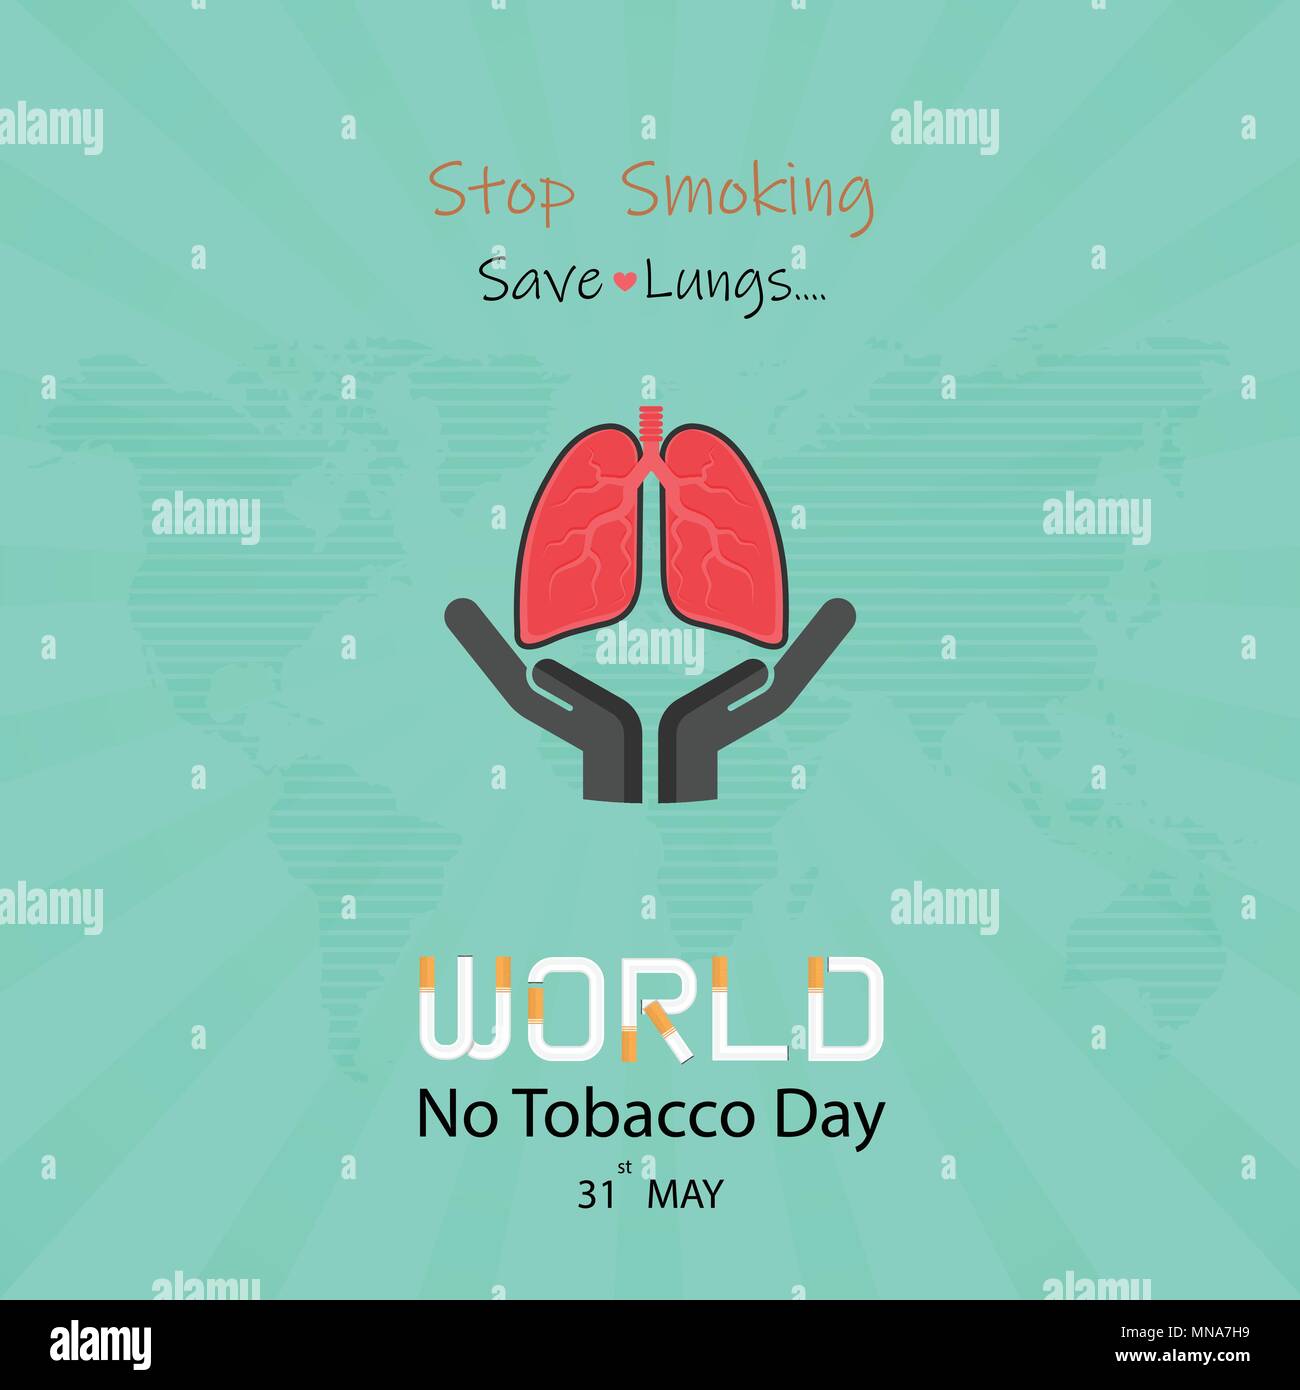 Lung cute cartoon character and Stop Smoking & Save Lungs ...